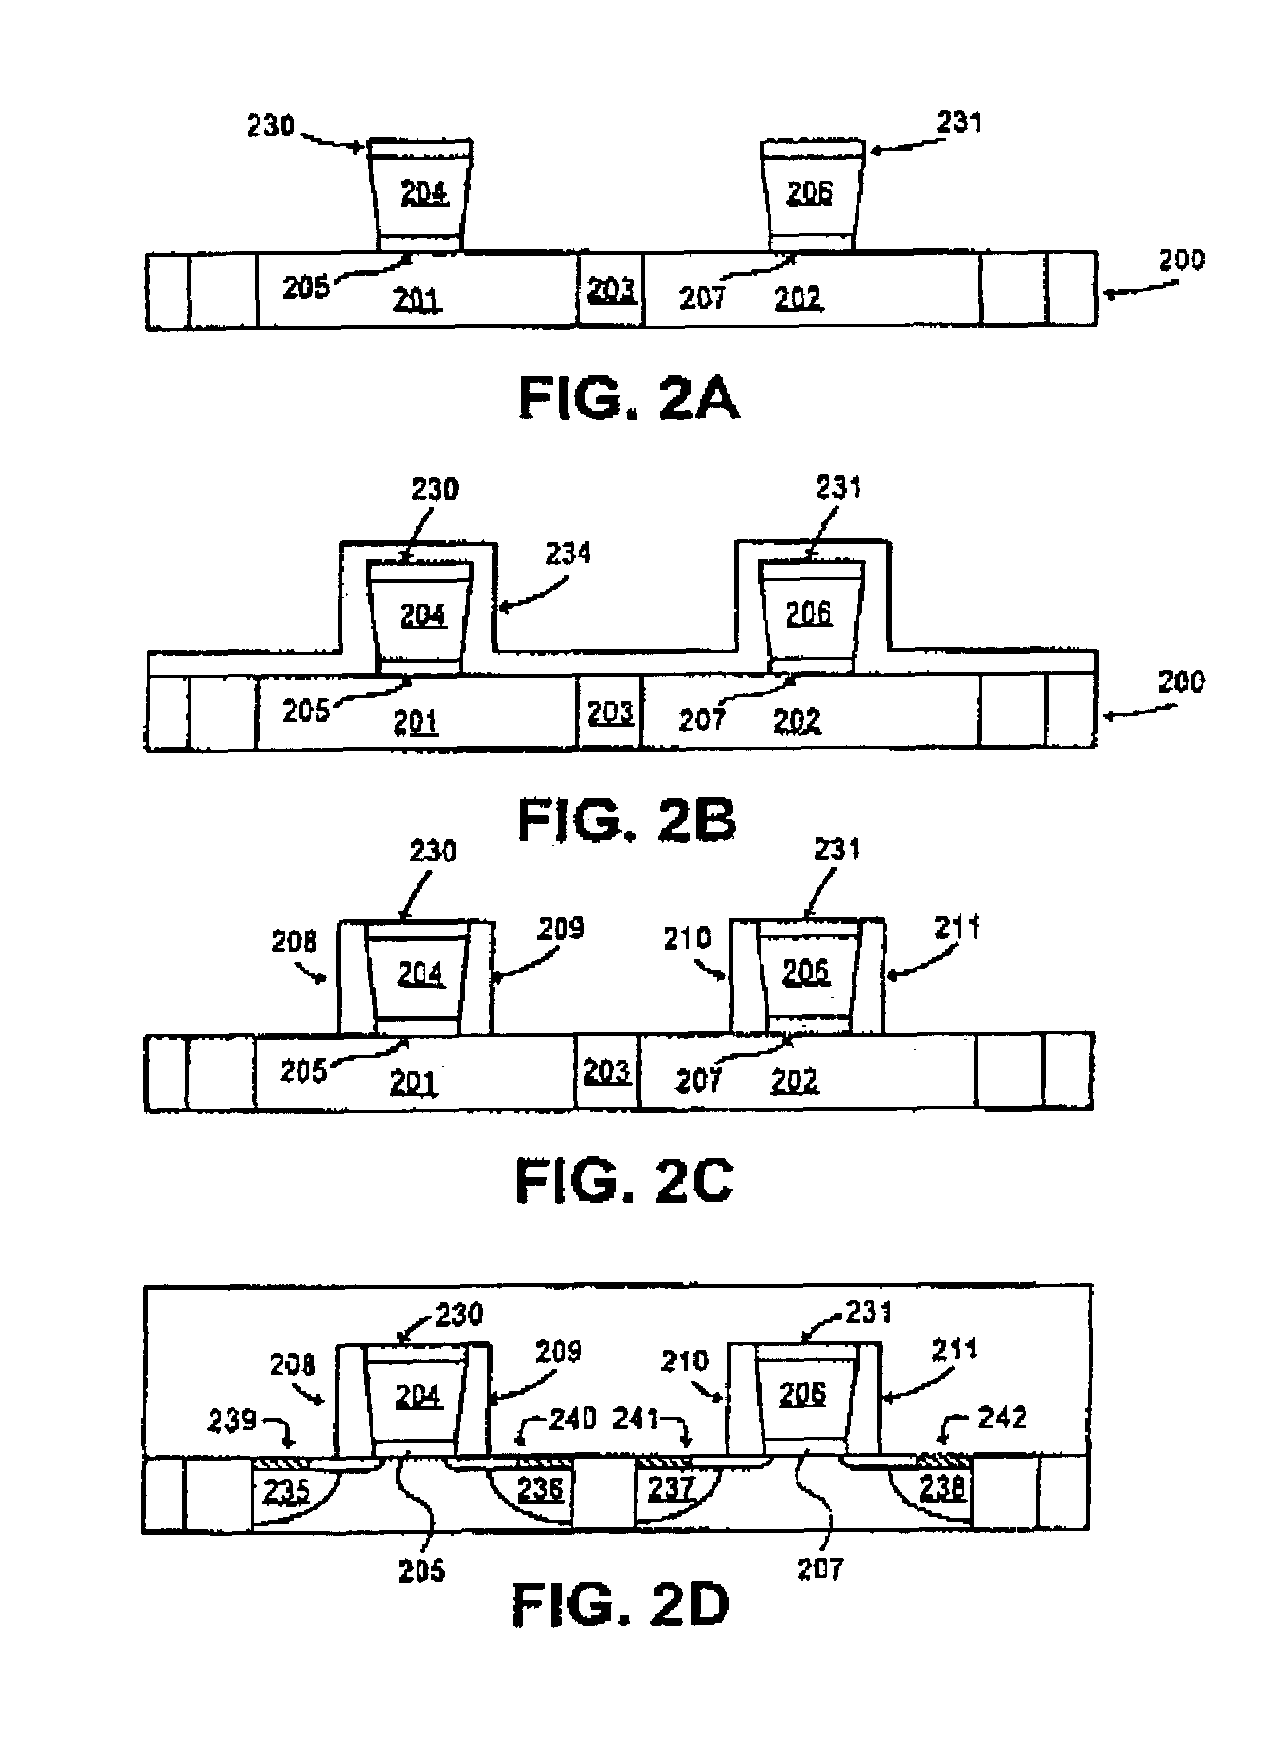 Replacement gate process for making a semiconductor device that includes a metal gate electrode